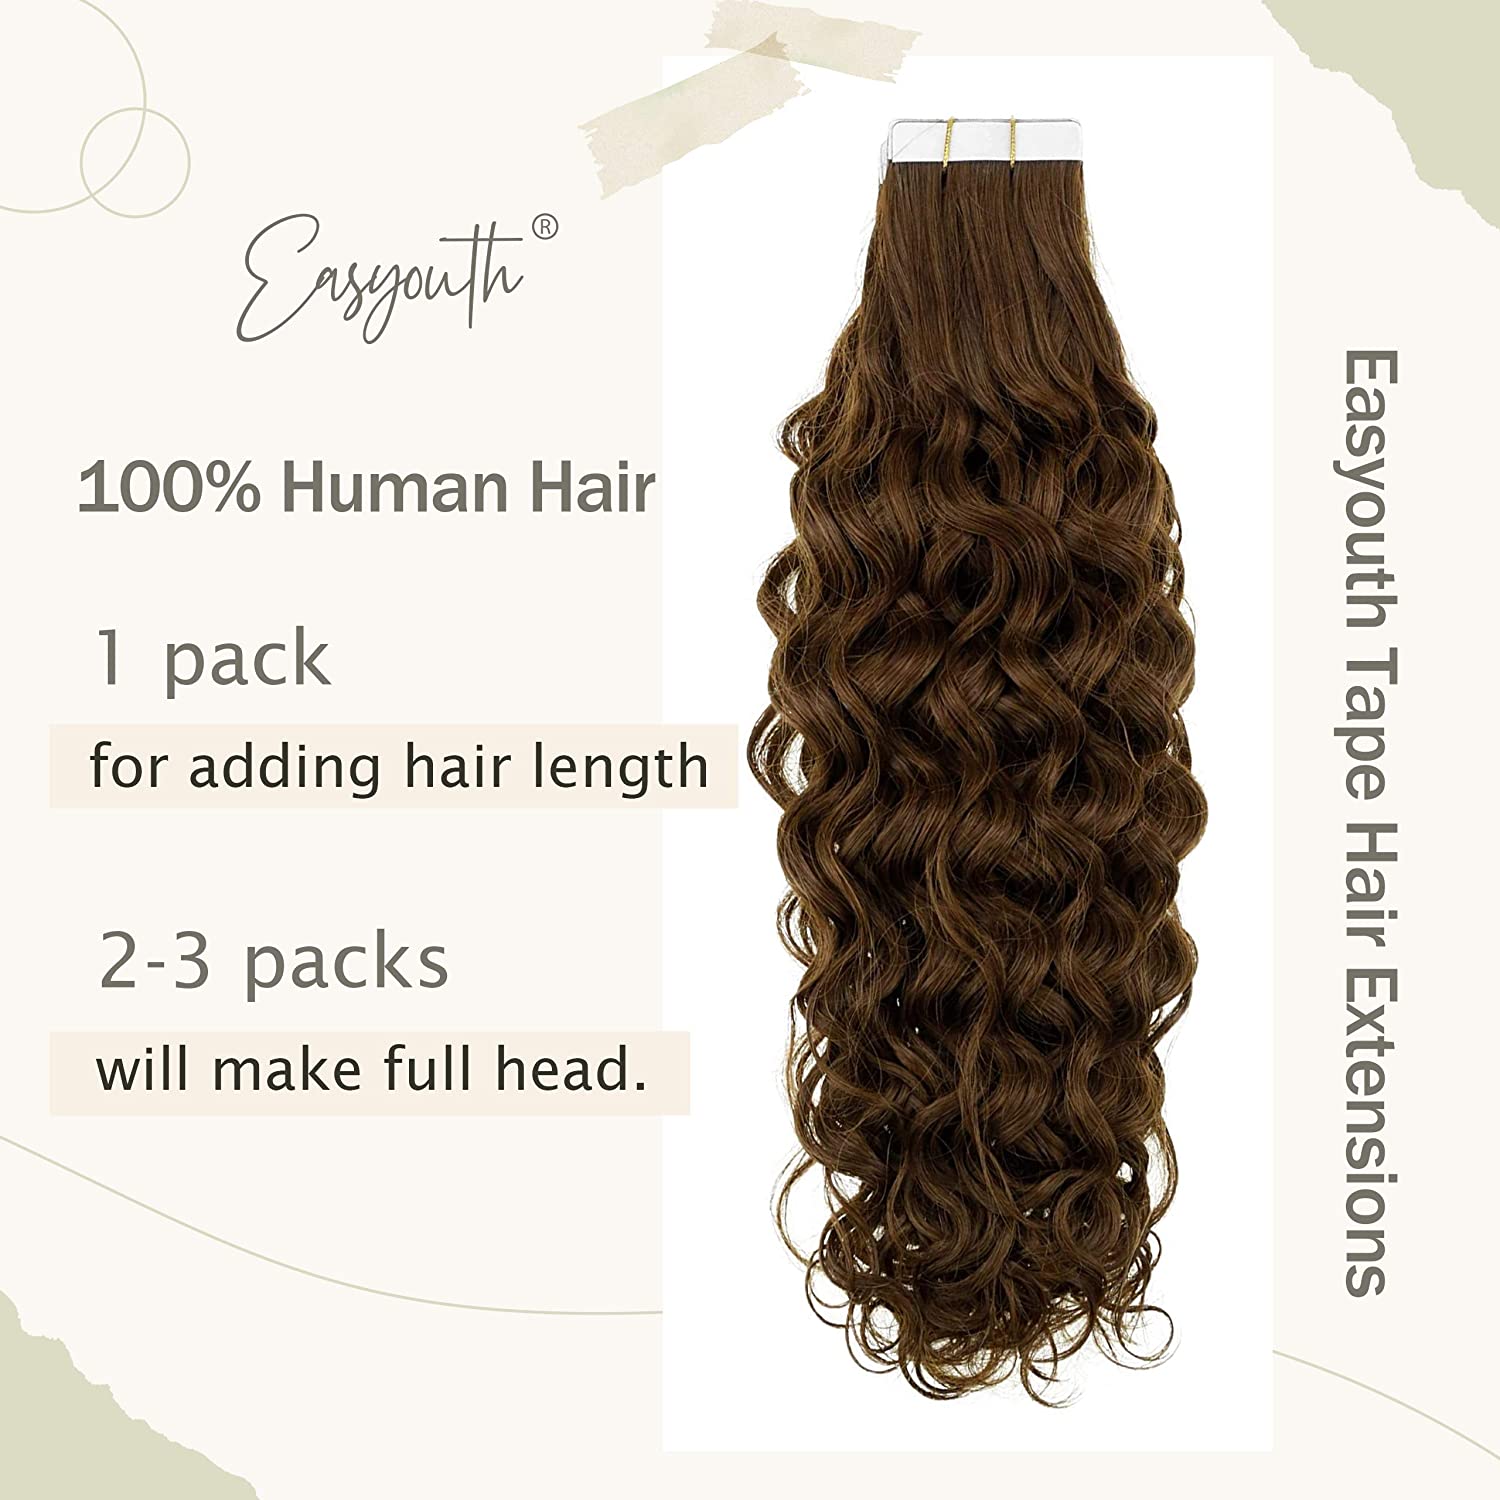 Easyouth Tape in Curly Hair Extensions Human Hair Natural Wave #4NW